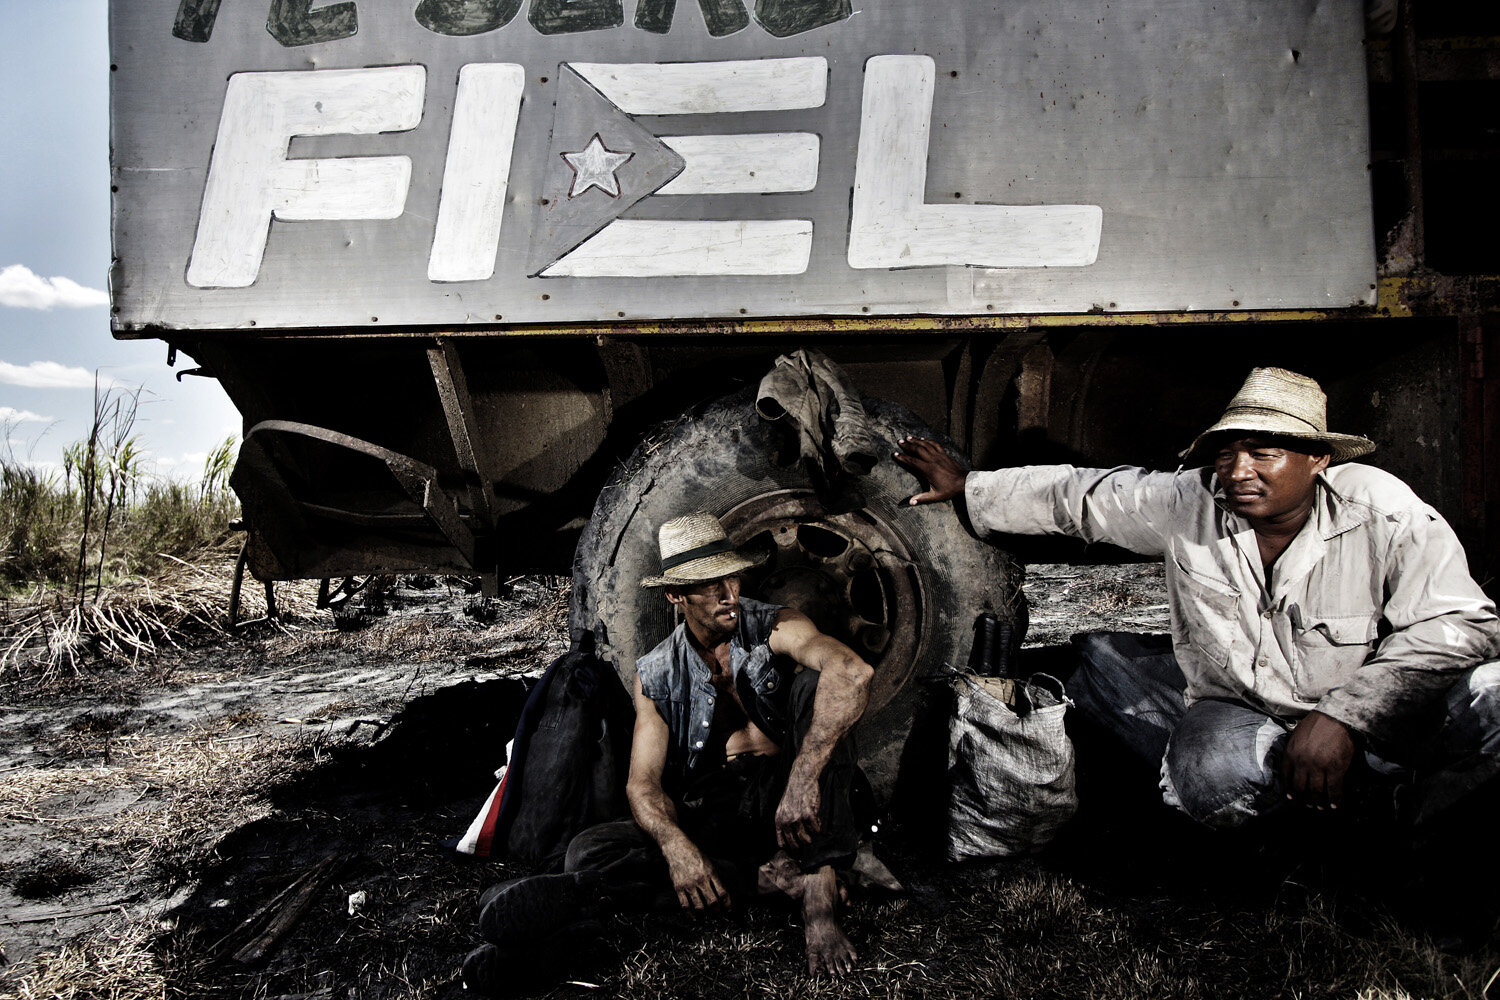  Maikel (L) and Juan Alberto (R) sugarcane cutter, sit under a truck where lunch is being served during a break. The sign on the truck reads, in Spanisch, both words: Fidel and Fiel, which means: Fidel and Faithfully. The two men have been working fo